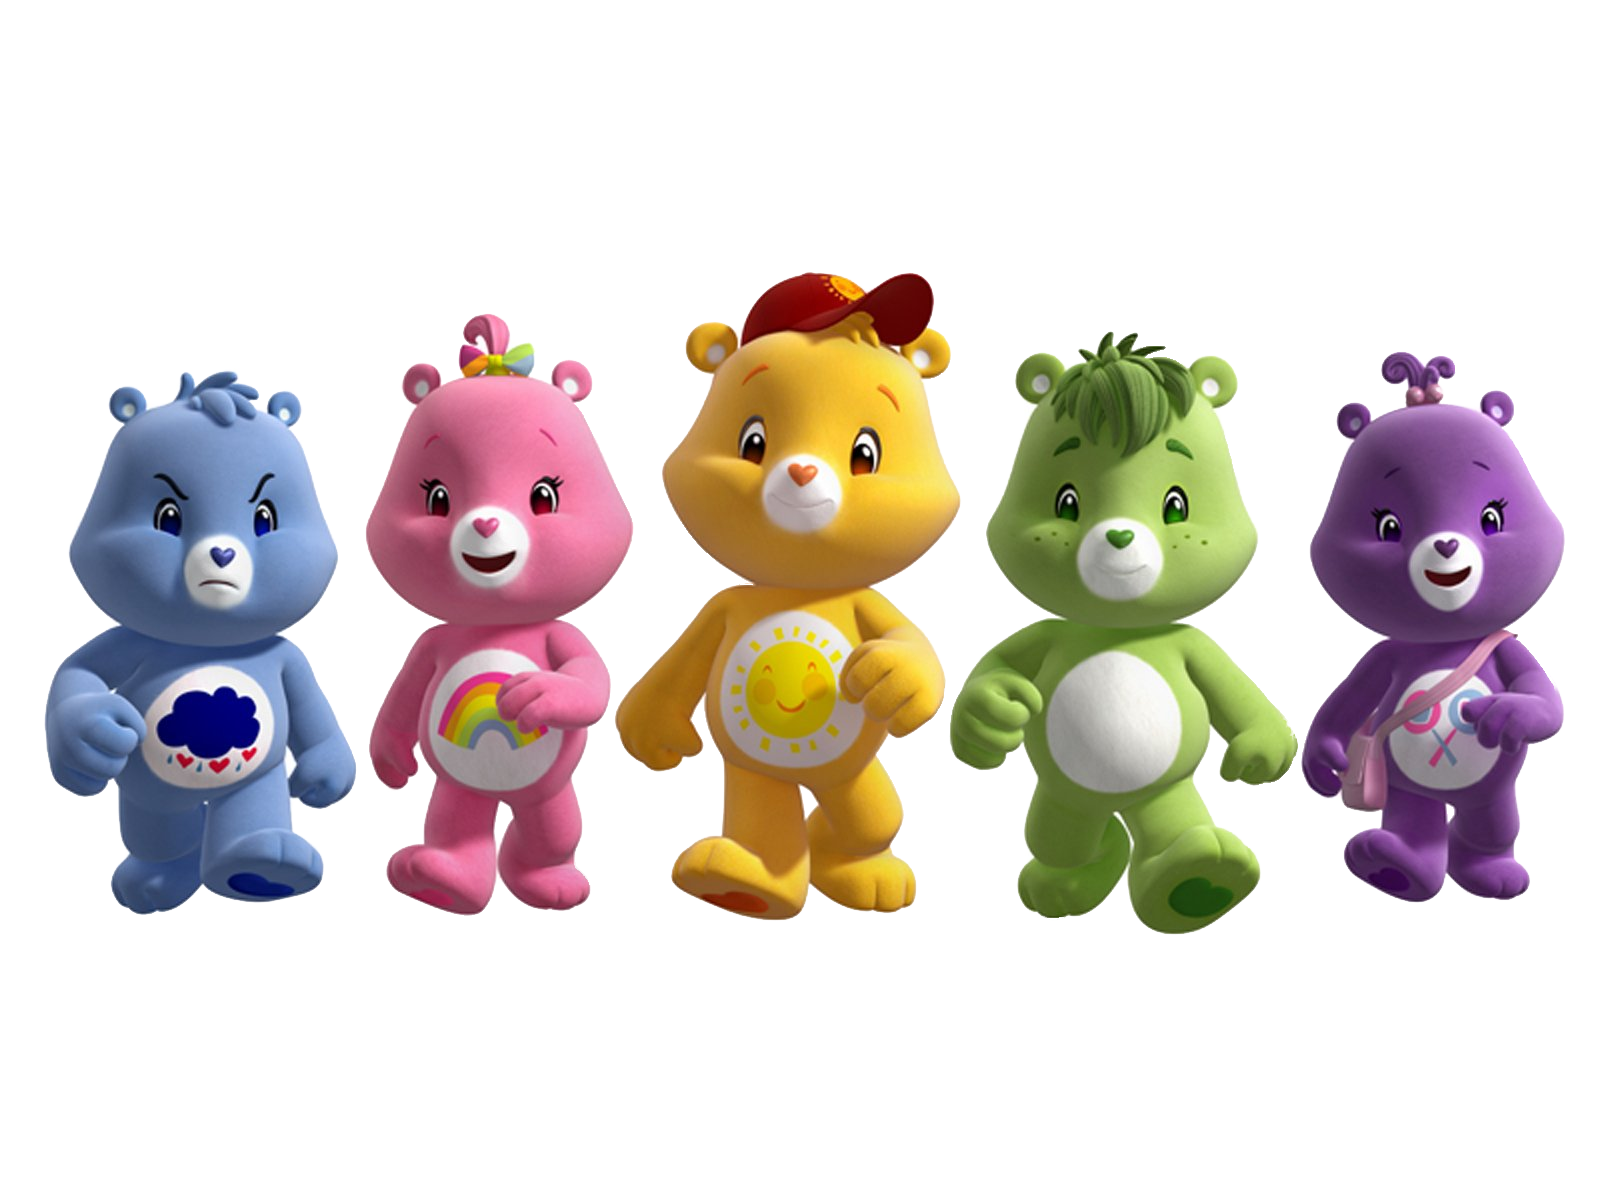 care-bears-party-free-party-printables-and-images-oh-my-fiesta-in